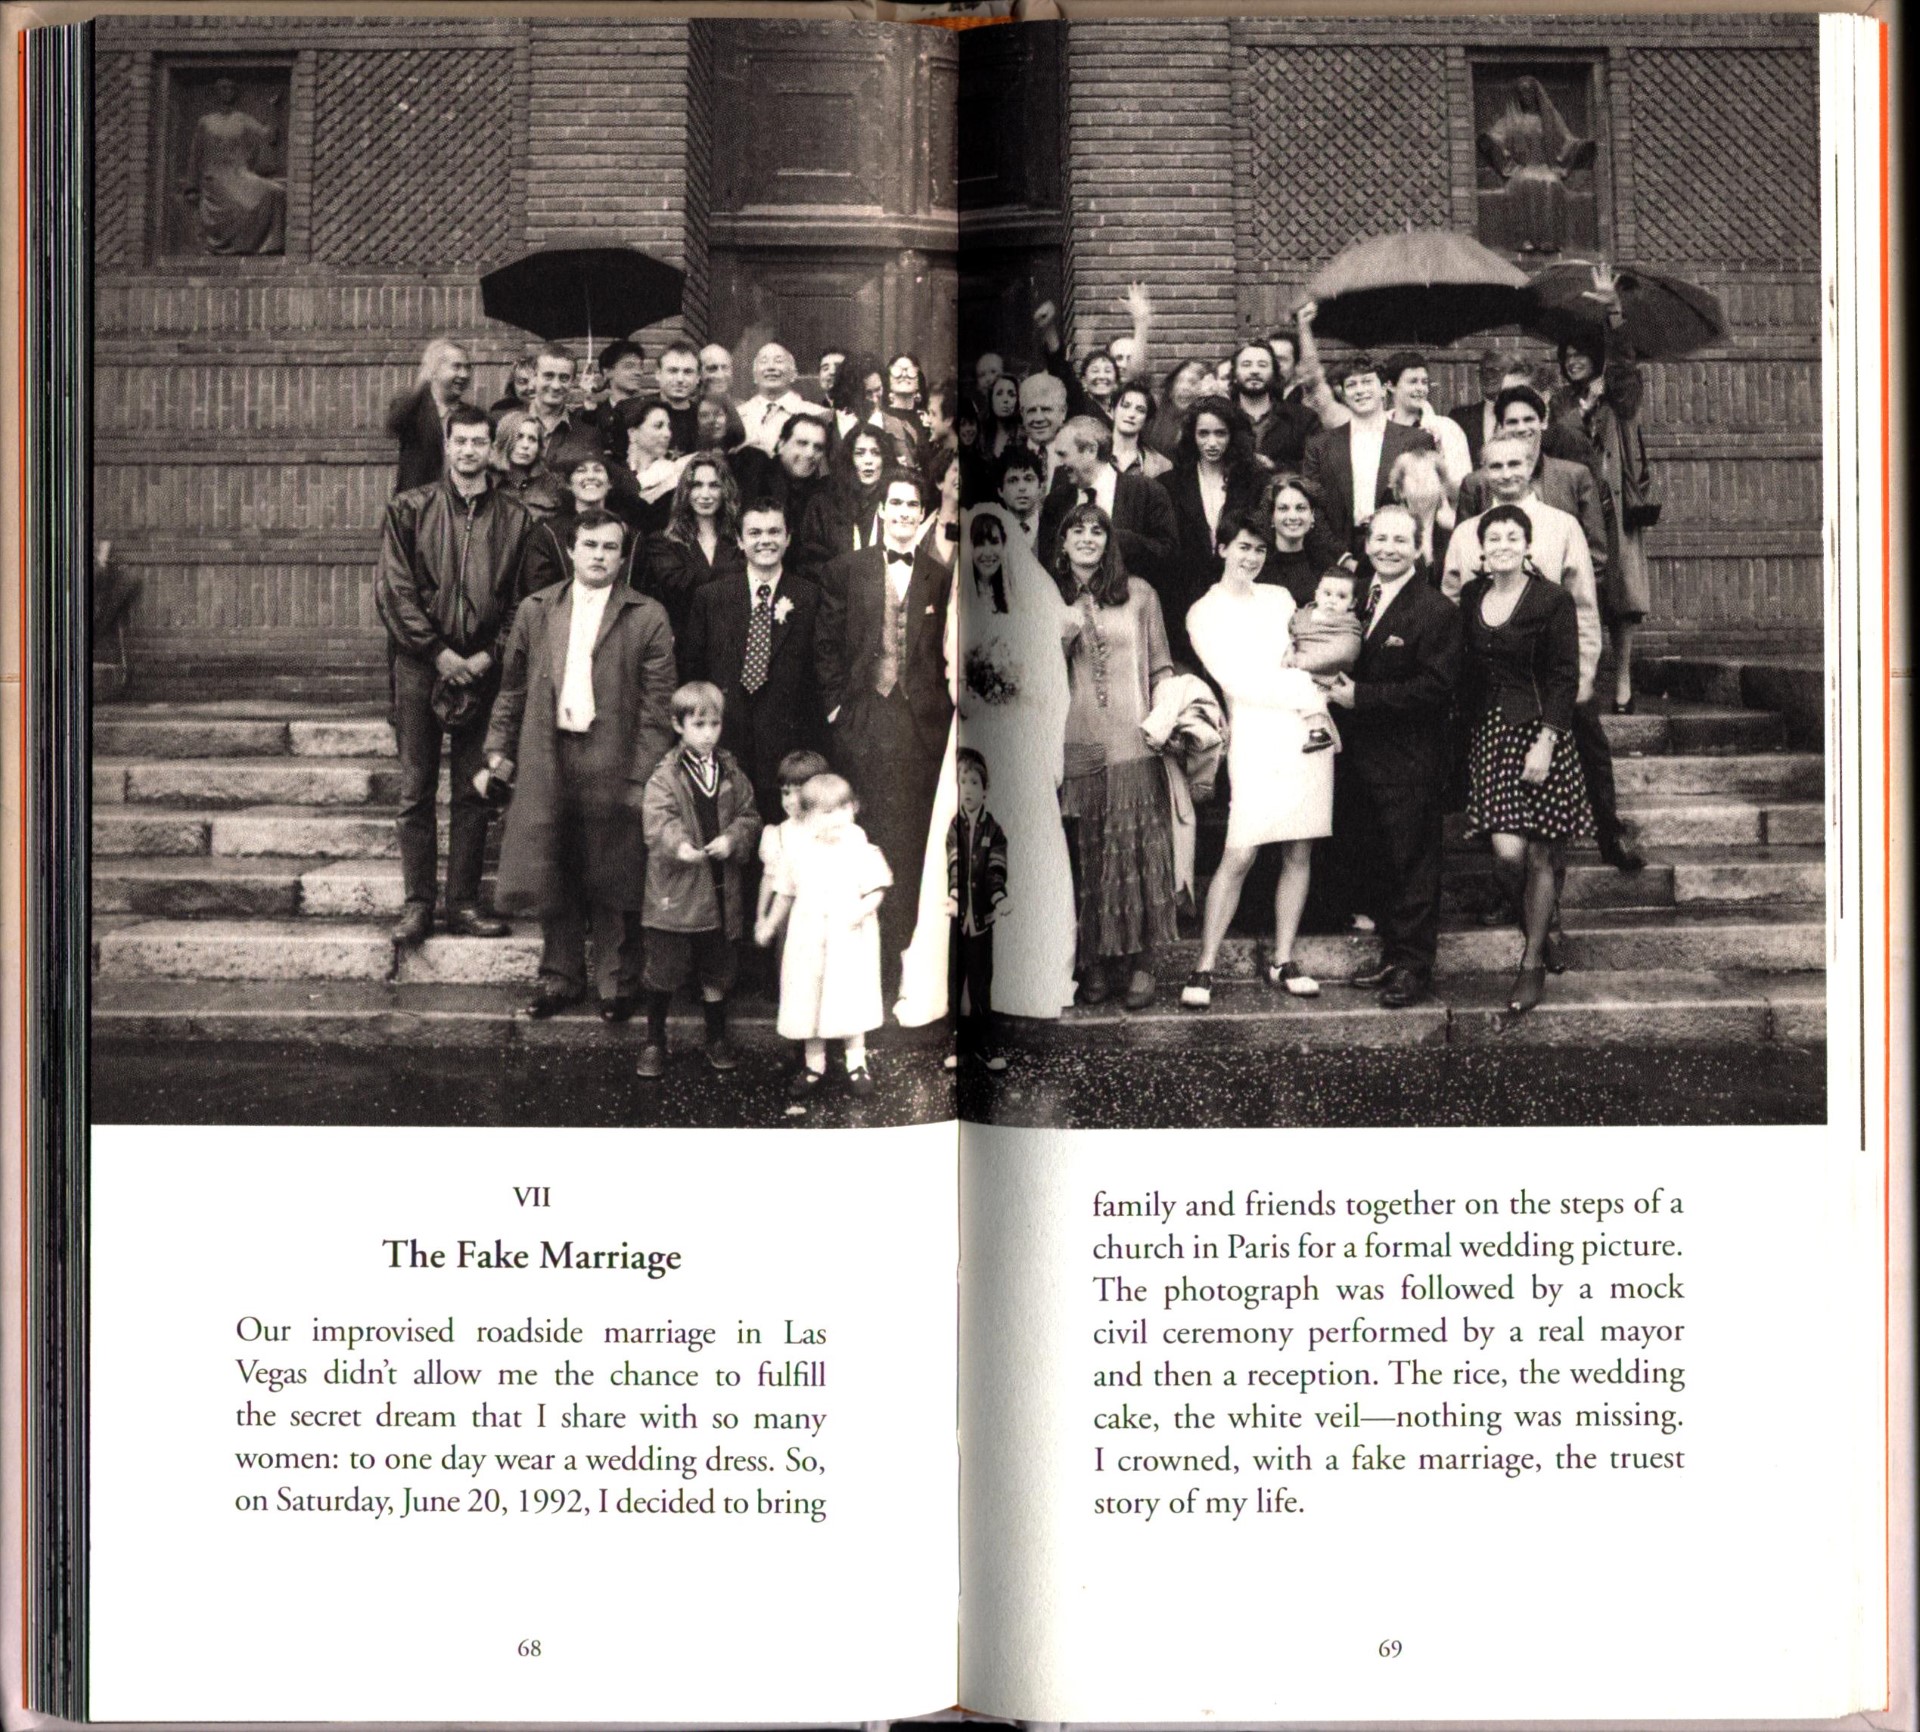 An open book with a black-and-white photo spread across two pages of a group of people standing on the steps of church, with a bride and groom in the center. Text beneath the photo has the header "VII / The Fake Marriage"